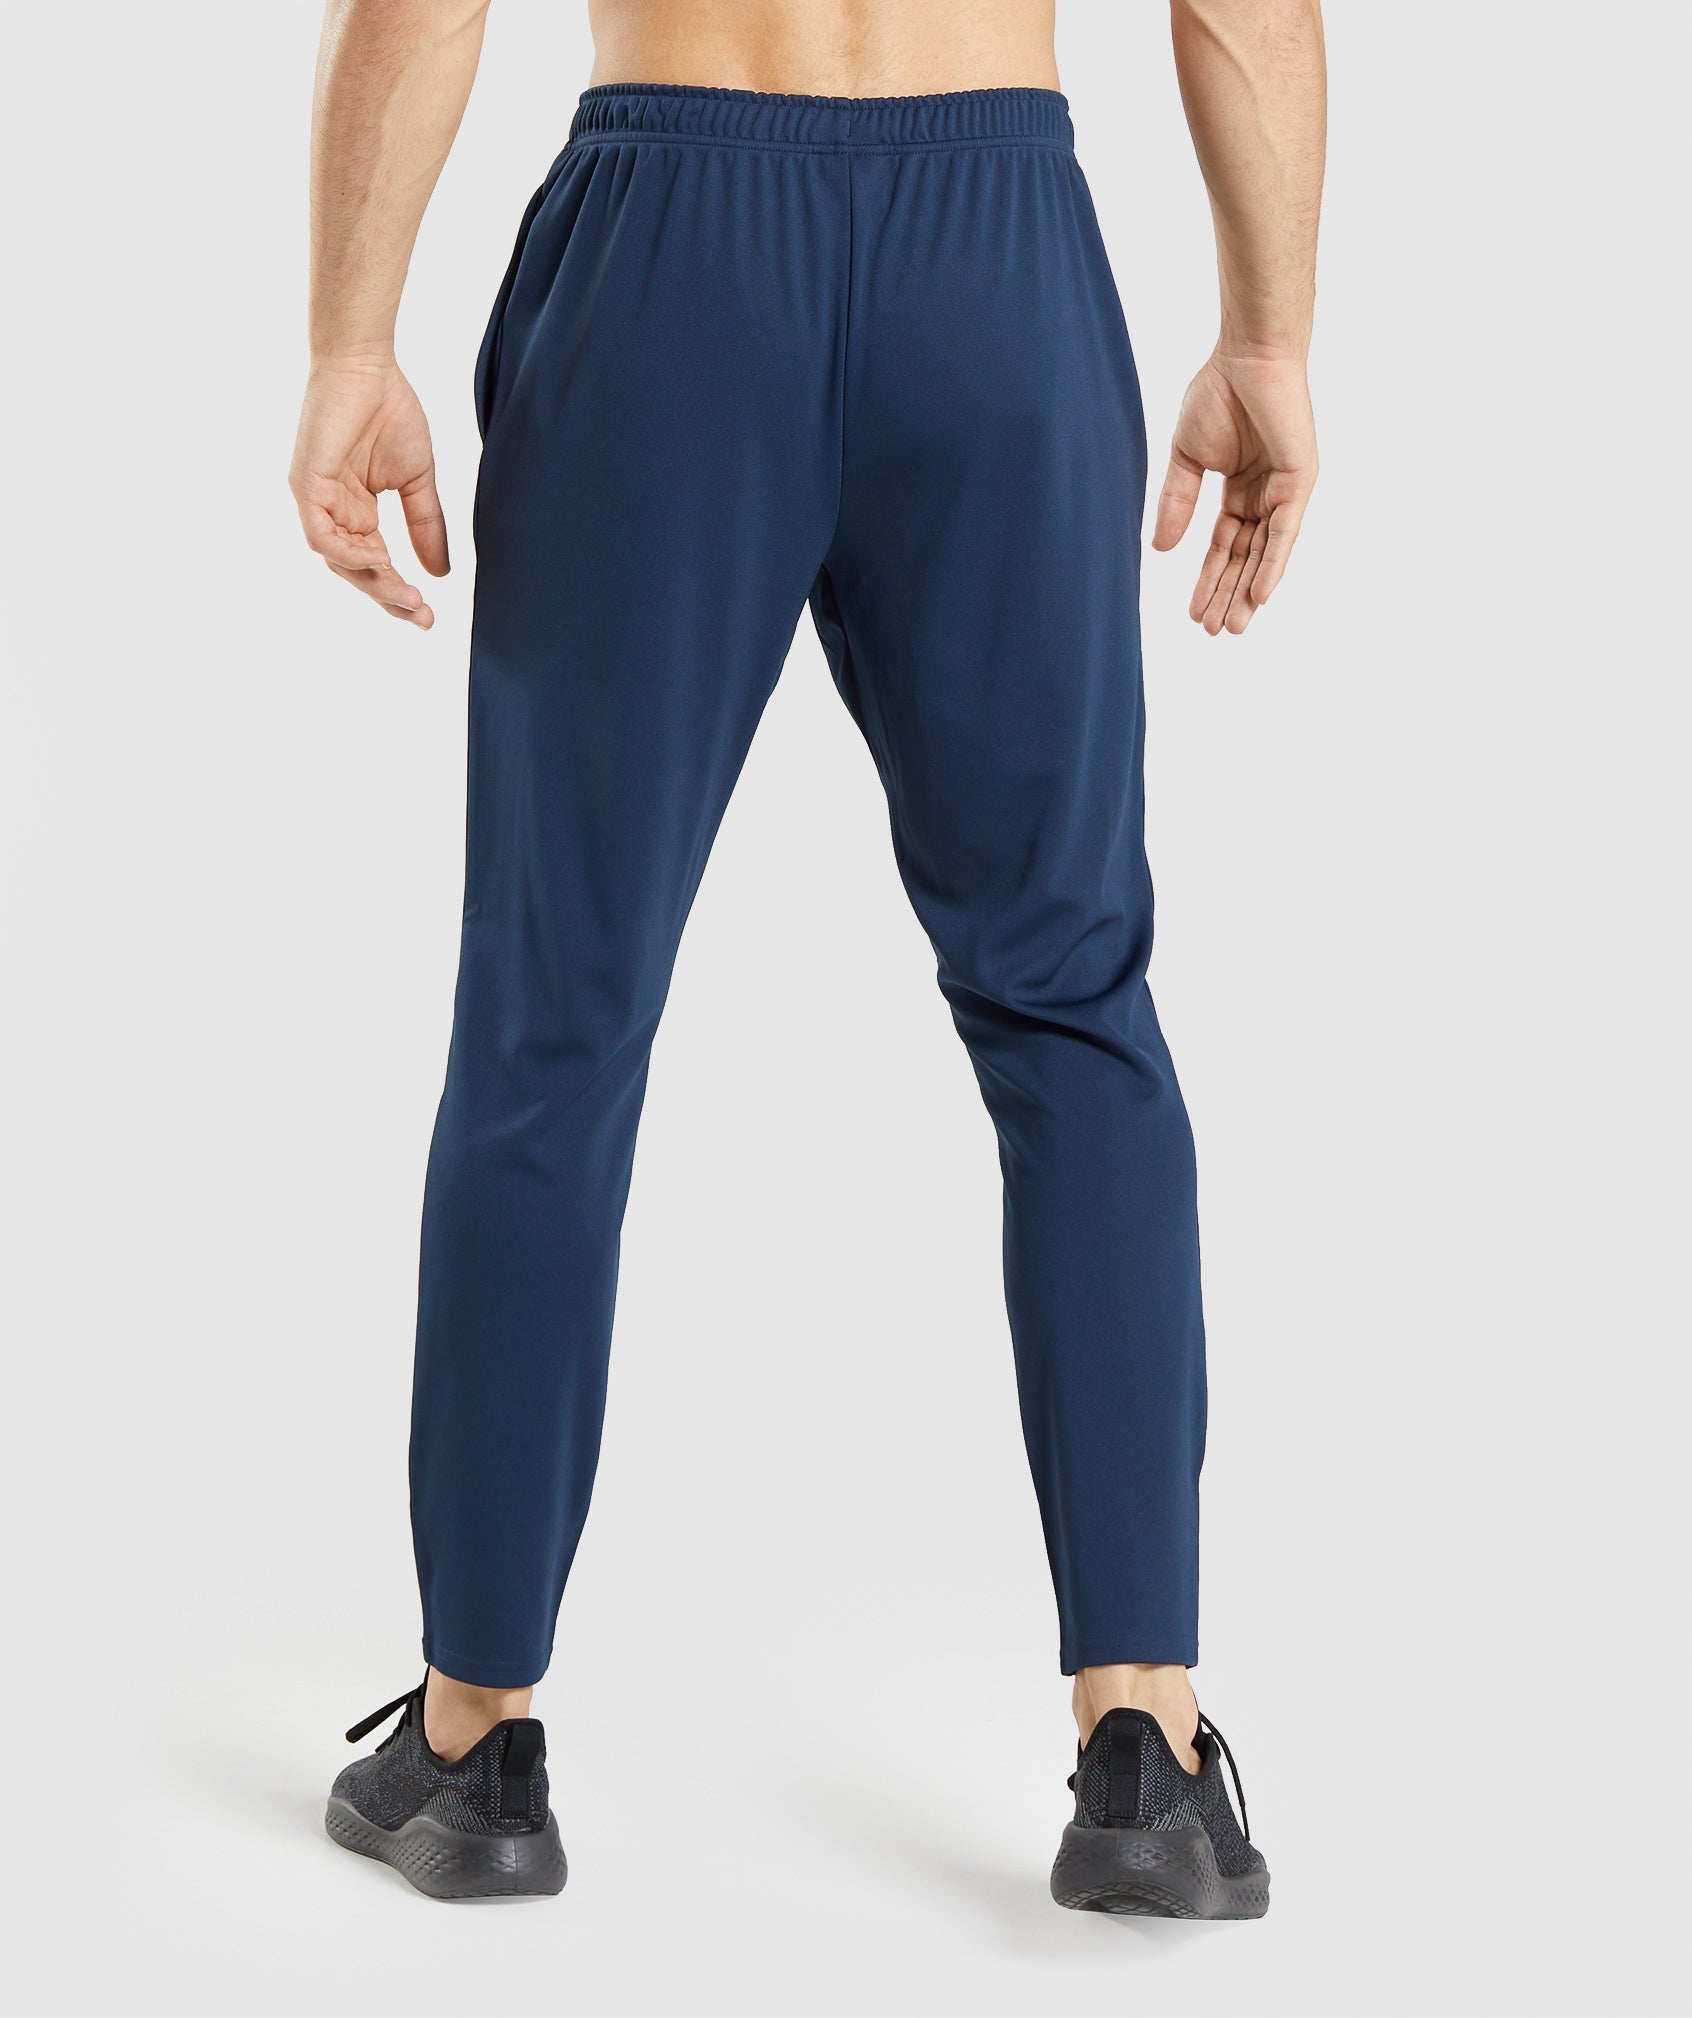 Arrival Knit Joggers in Navy - view 2